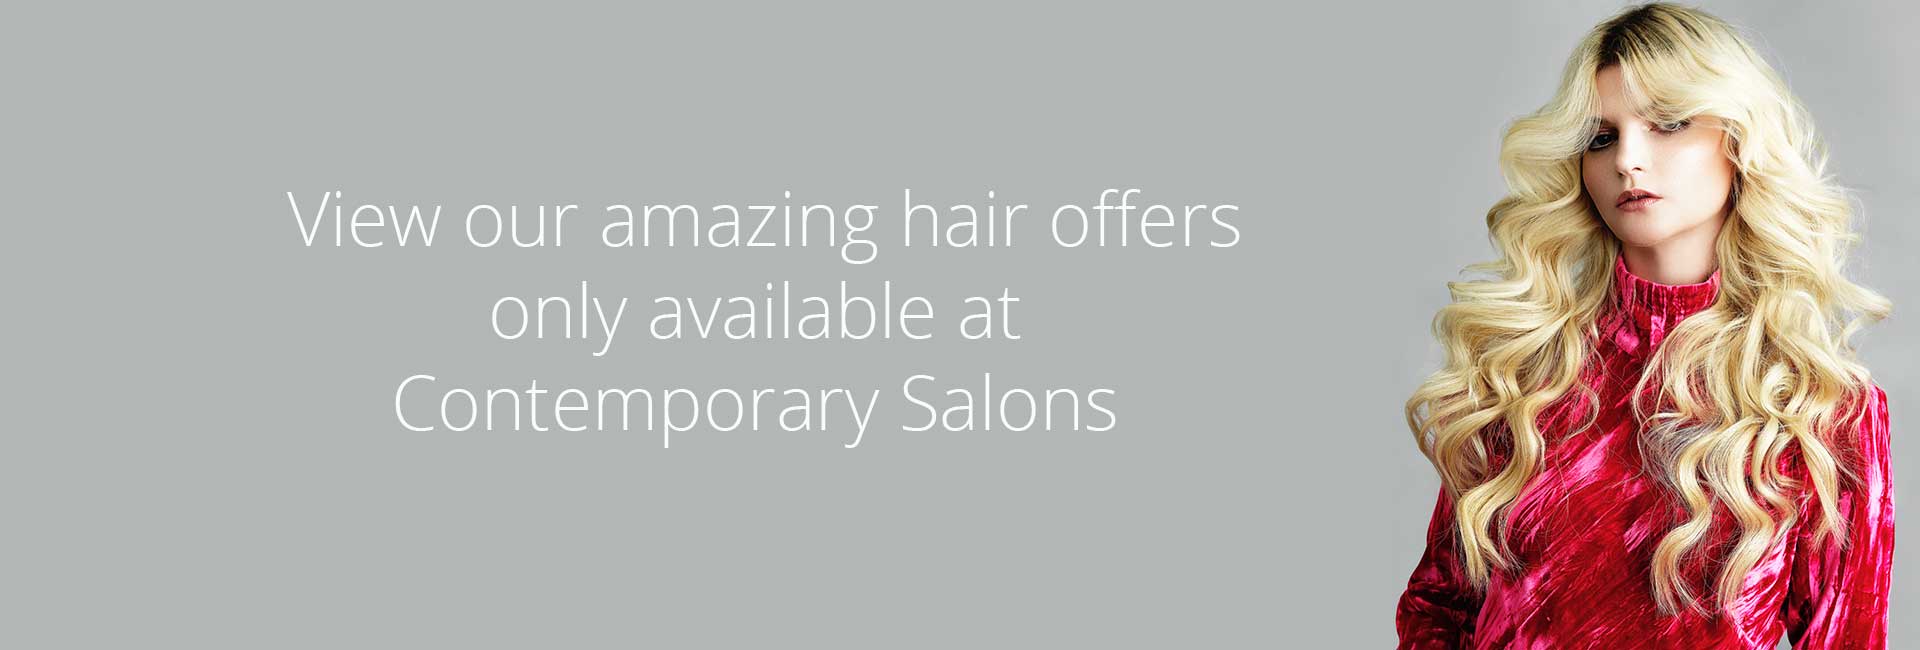 View our amazing hair offers only available at Contemporary Salons 2 1